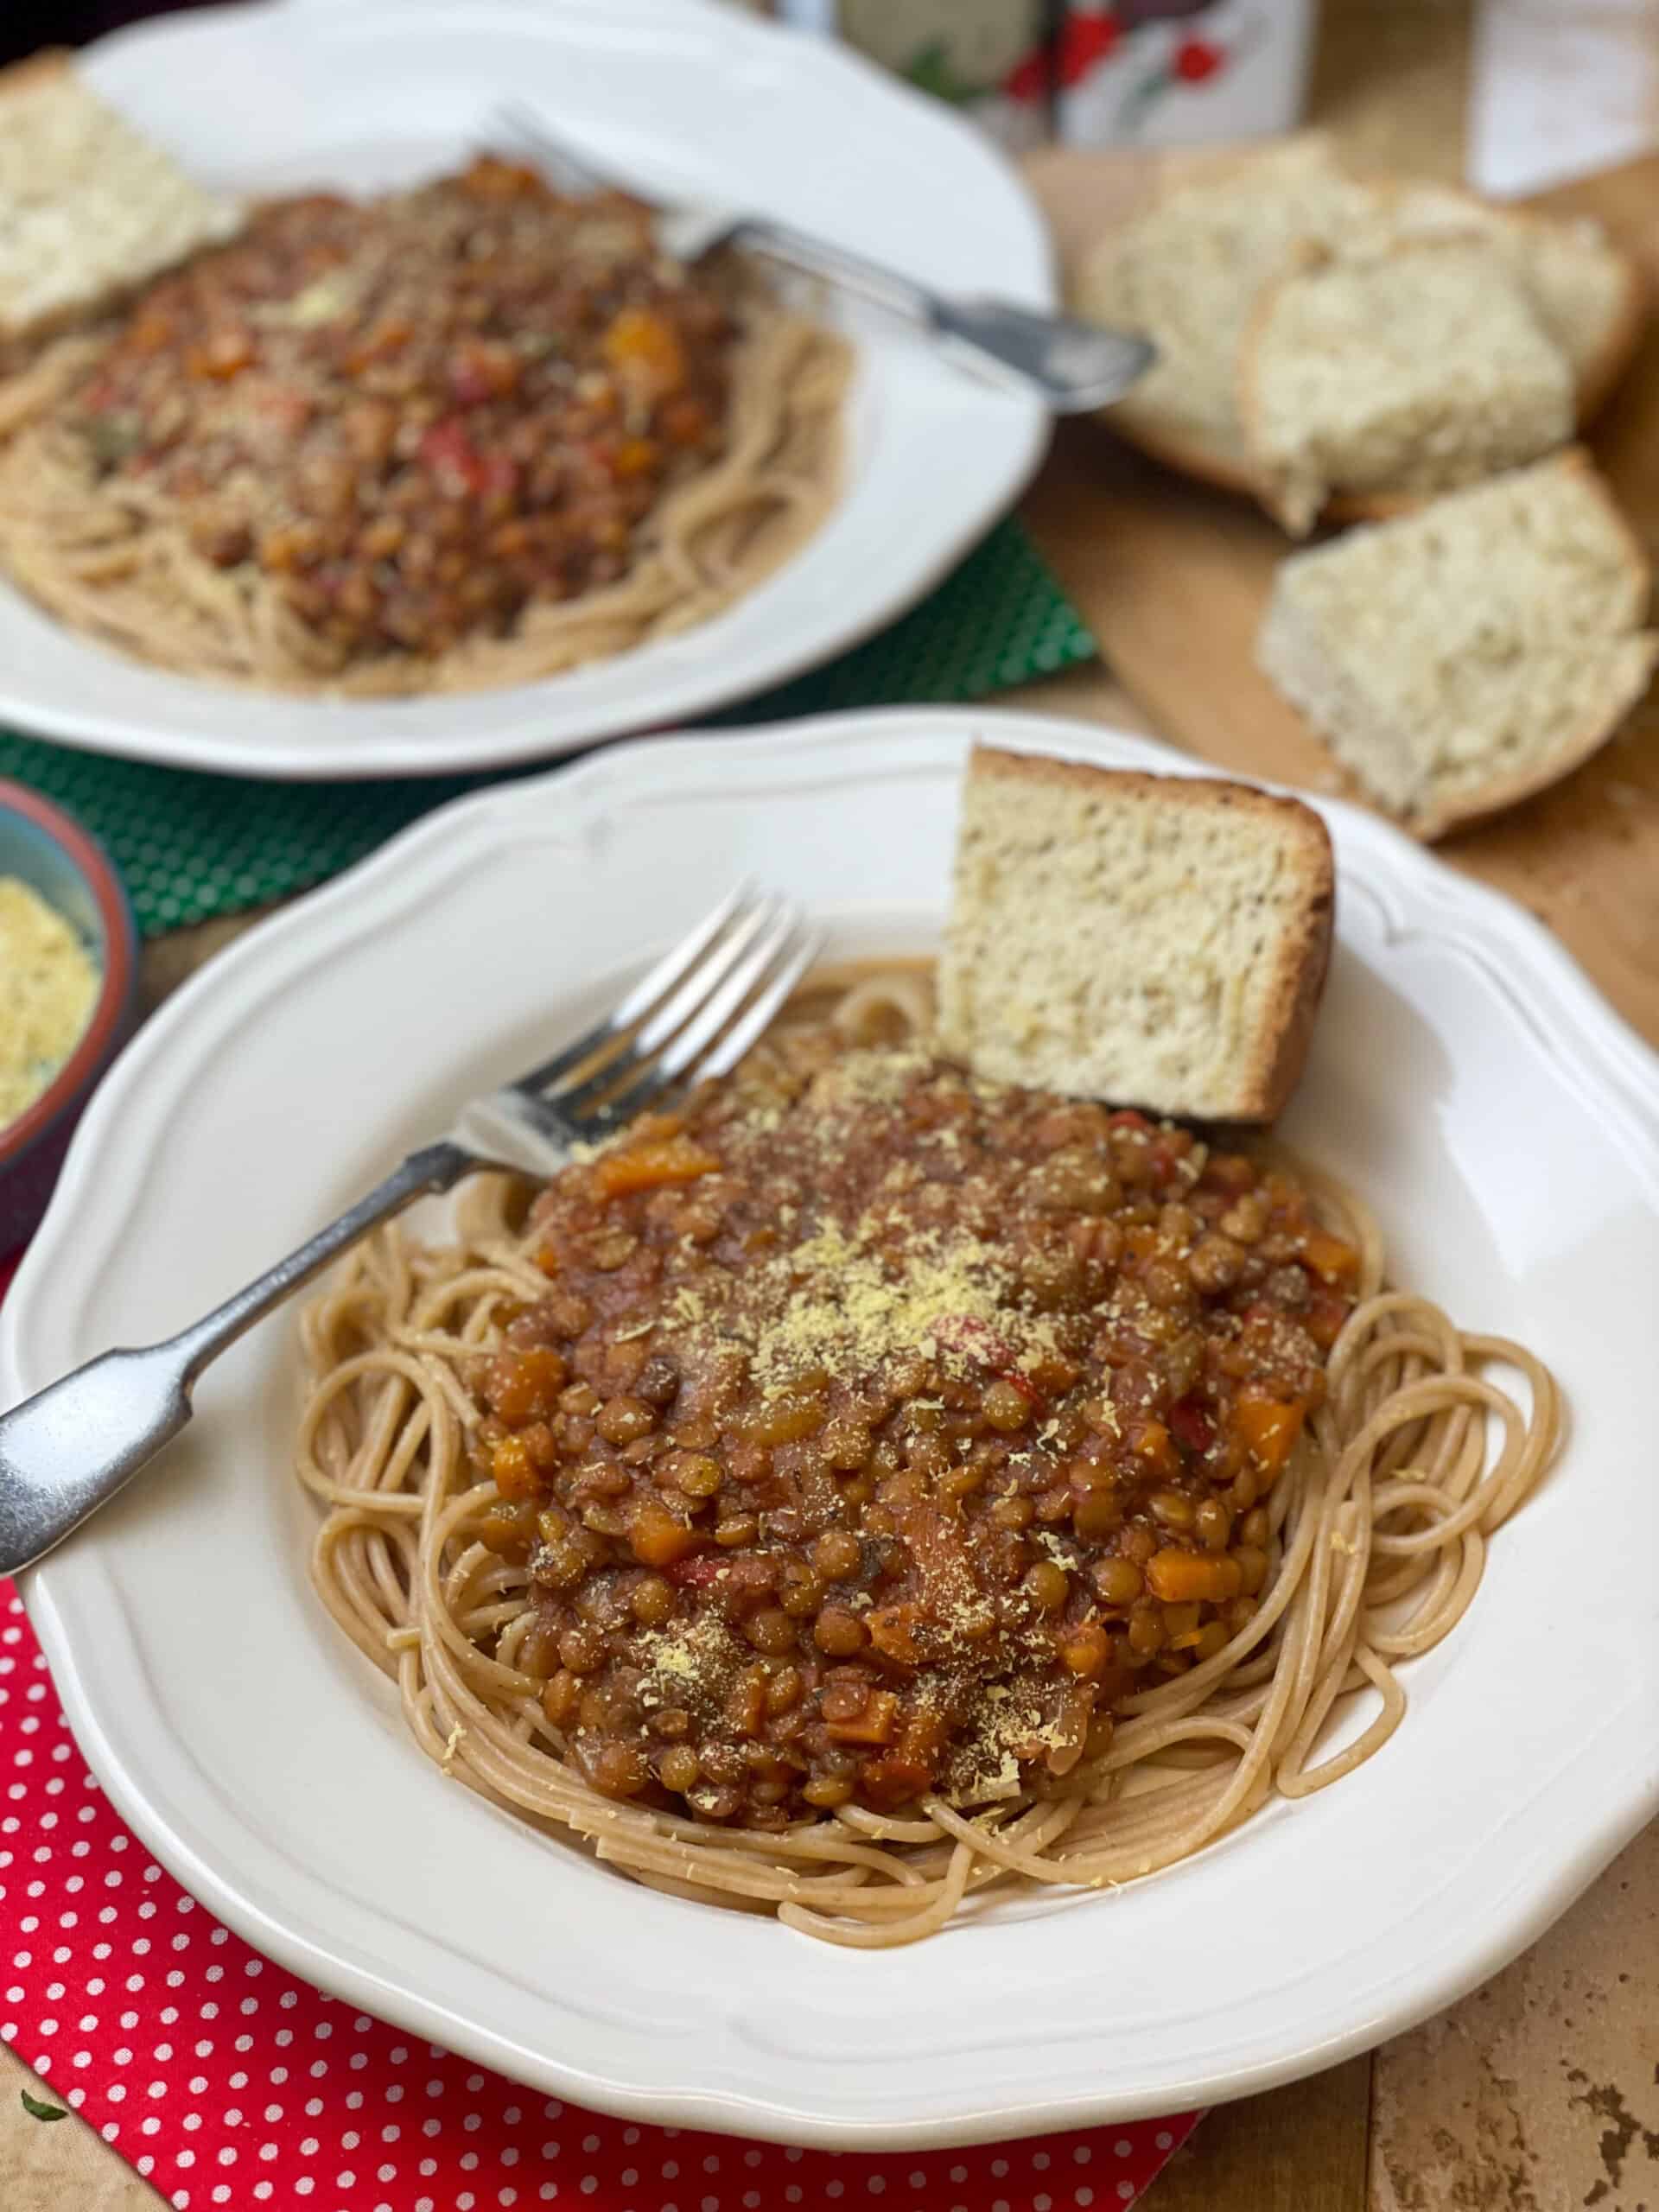 Two bowls of slow cooker green lentil spaghetti Bolognese, with sprinkle of nutritional yeast, wedge of her bread, silver fork and red check tea towel, featured image.